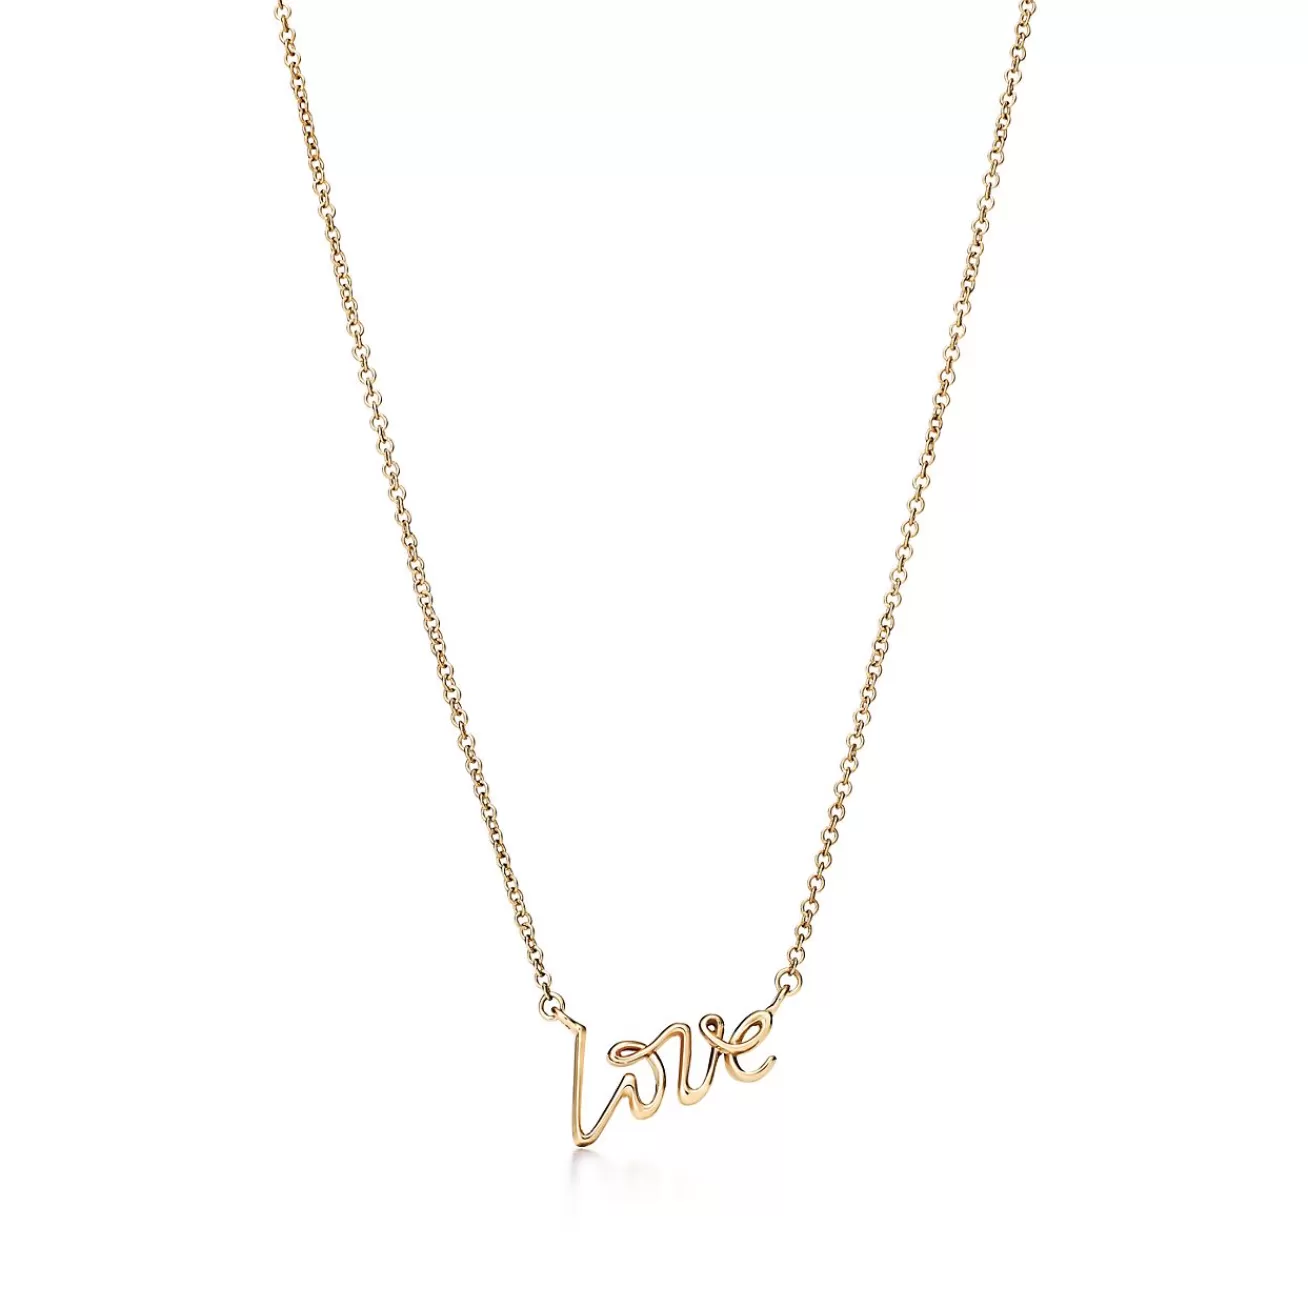 Tiffany & Co. Paloma's Graffiti love pendant in 18k gold, mini. | ^ Necklaces & Pendants | Gifts for Her